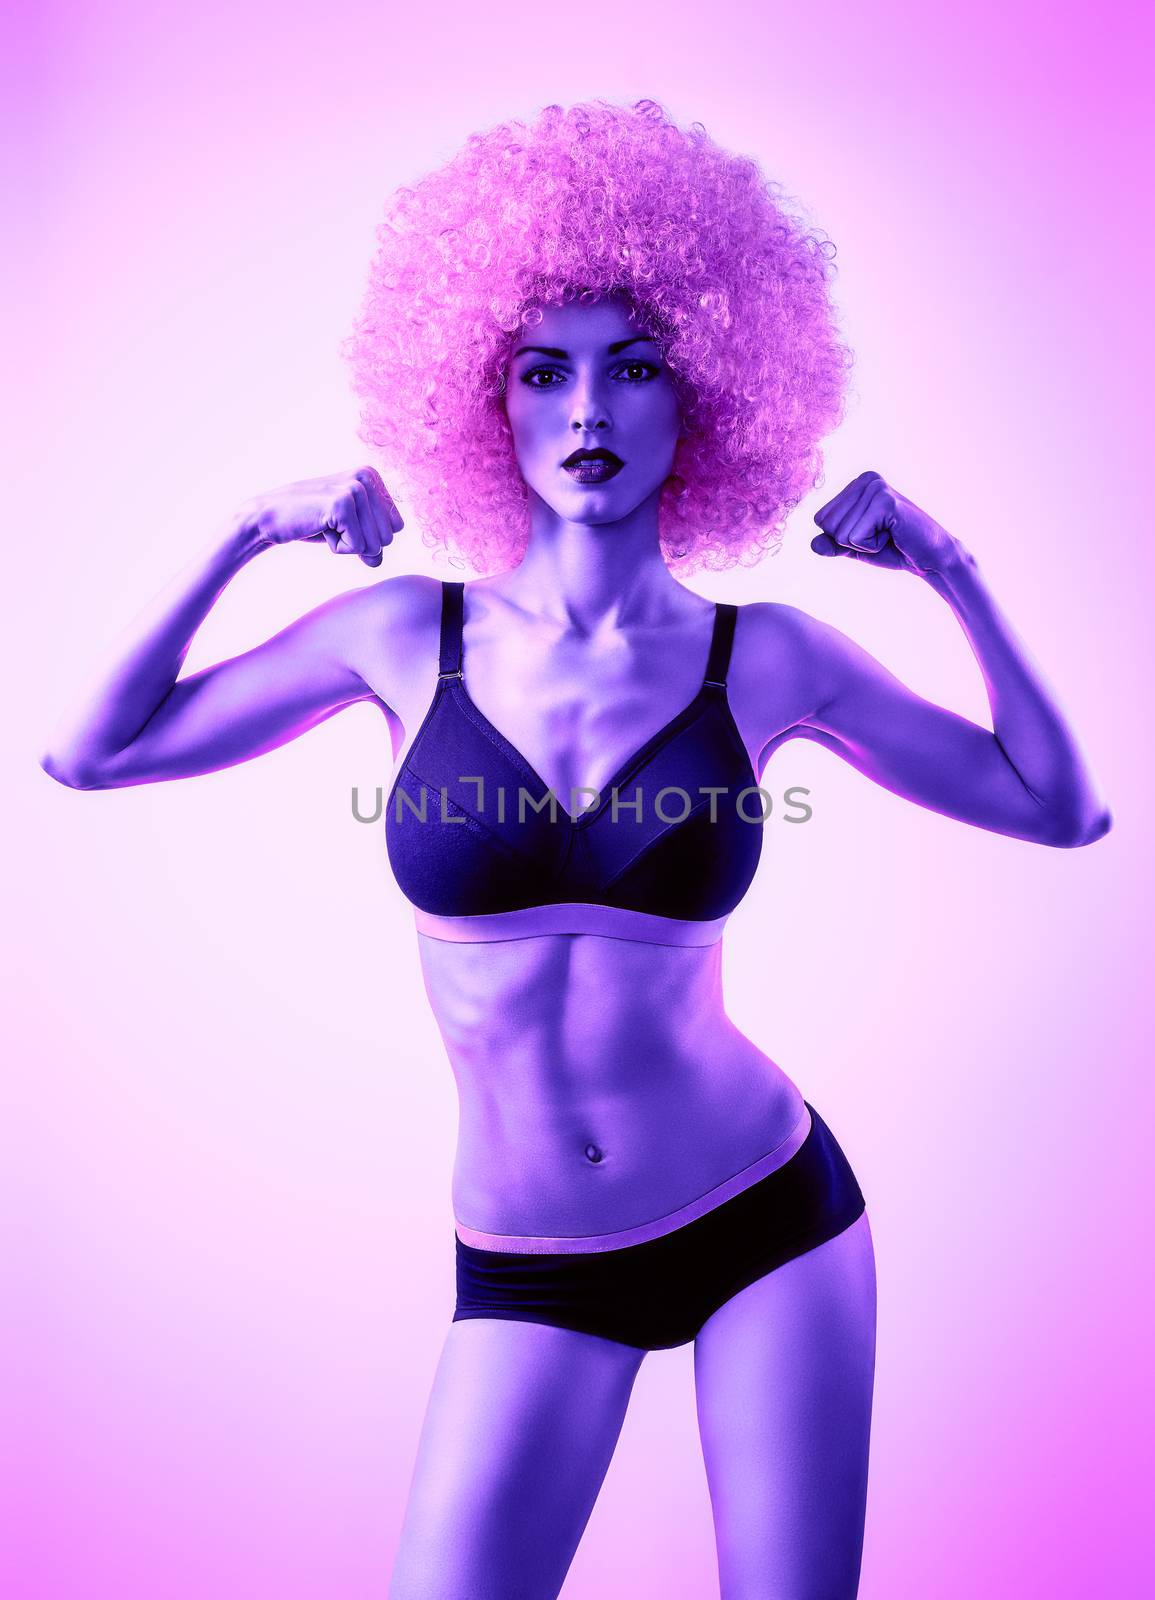 Beauty fashion. Fitness woman athletic body, afro  by 918